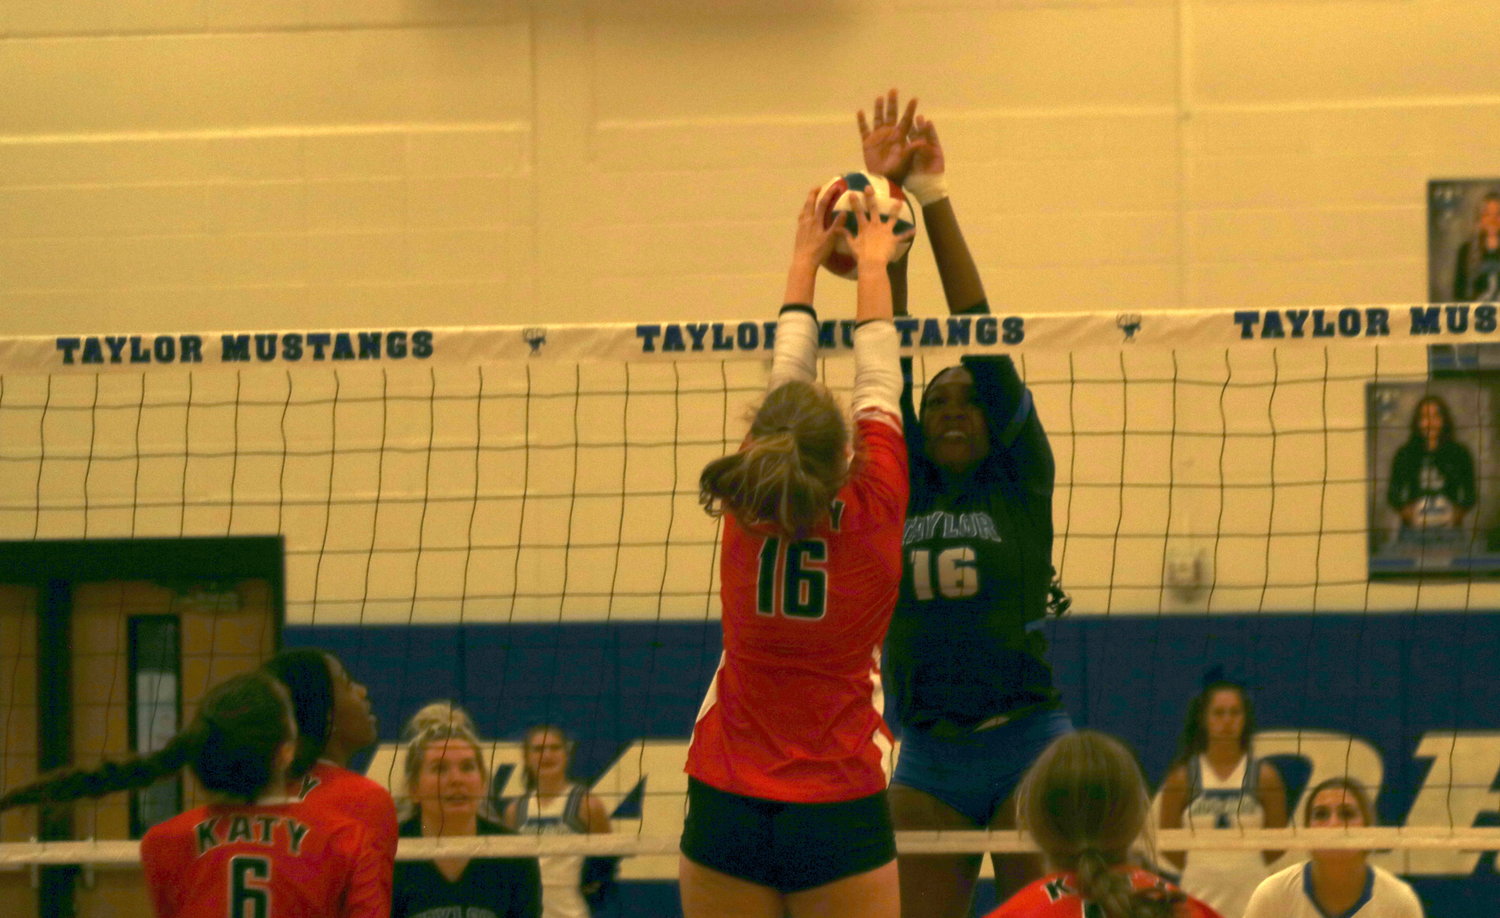 Maddie Waak tries to tip a ball over the net while Bria Dixon tries to block it during a District 19-6A match between Katy and Taylor at the Taylor gym.